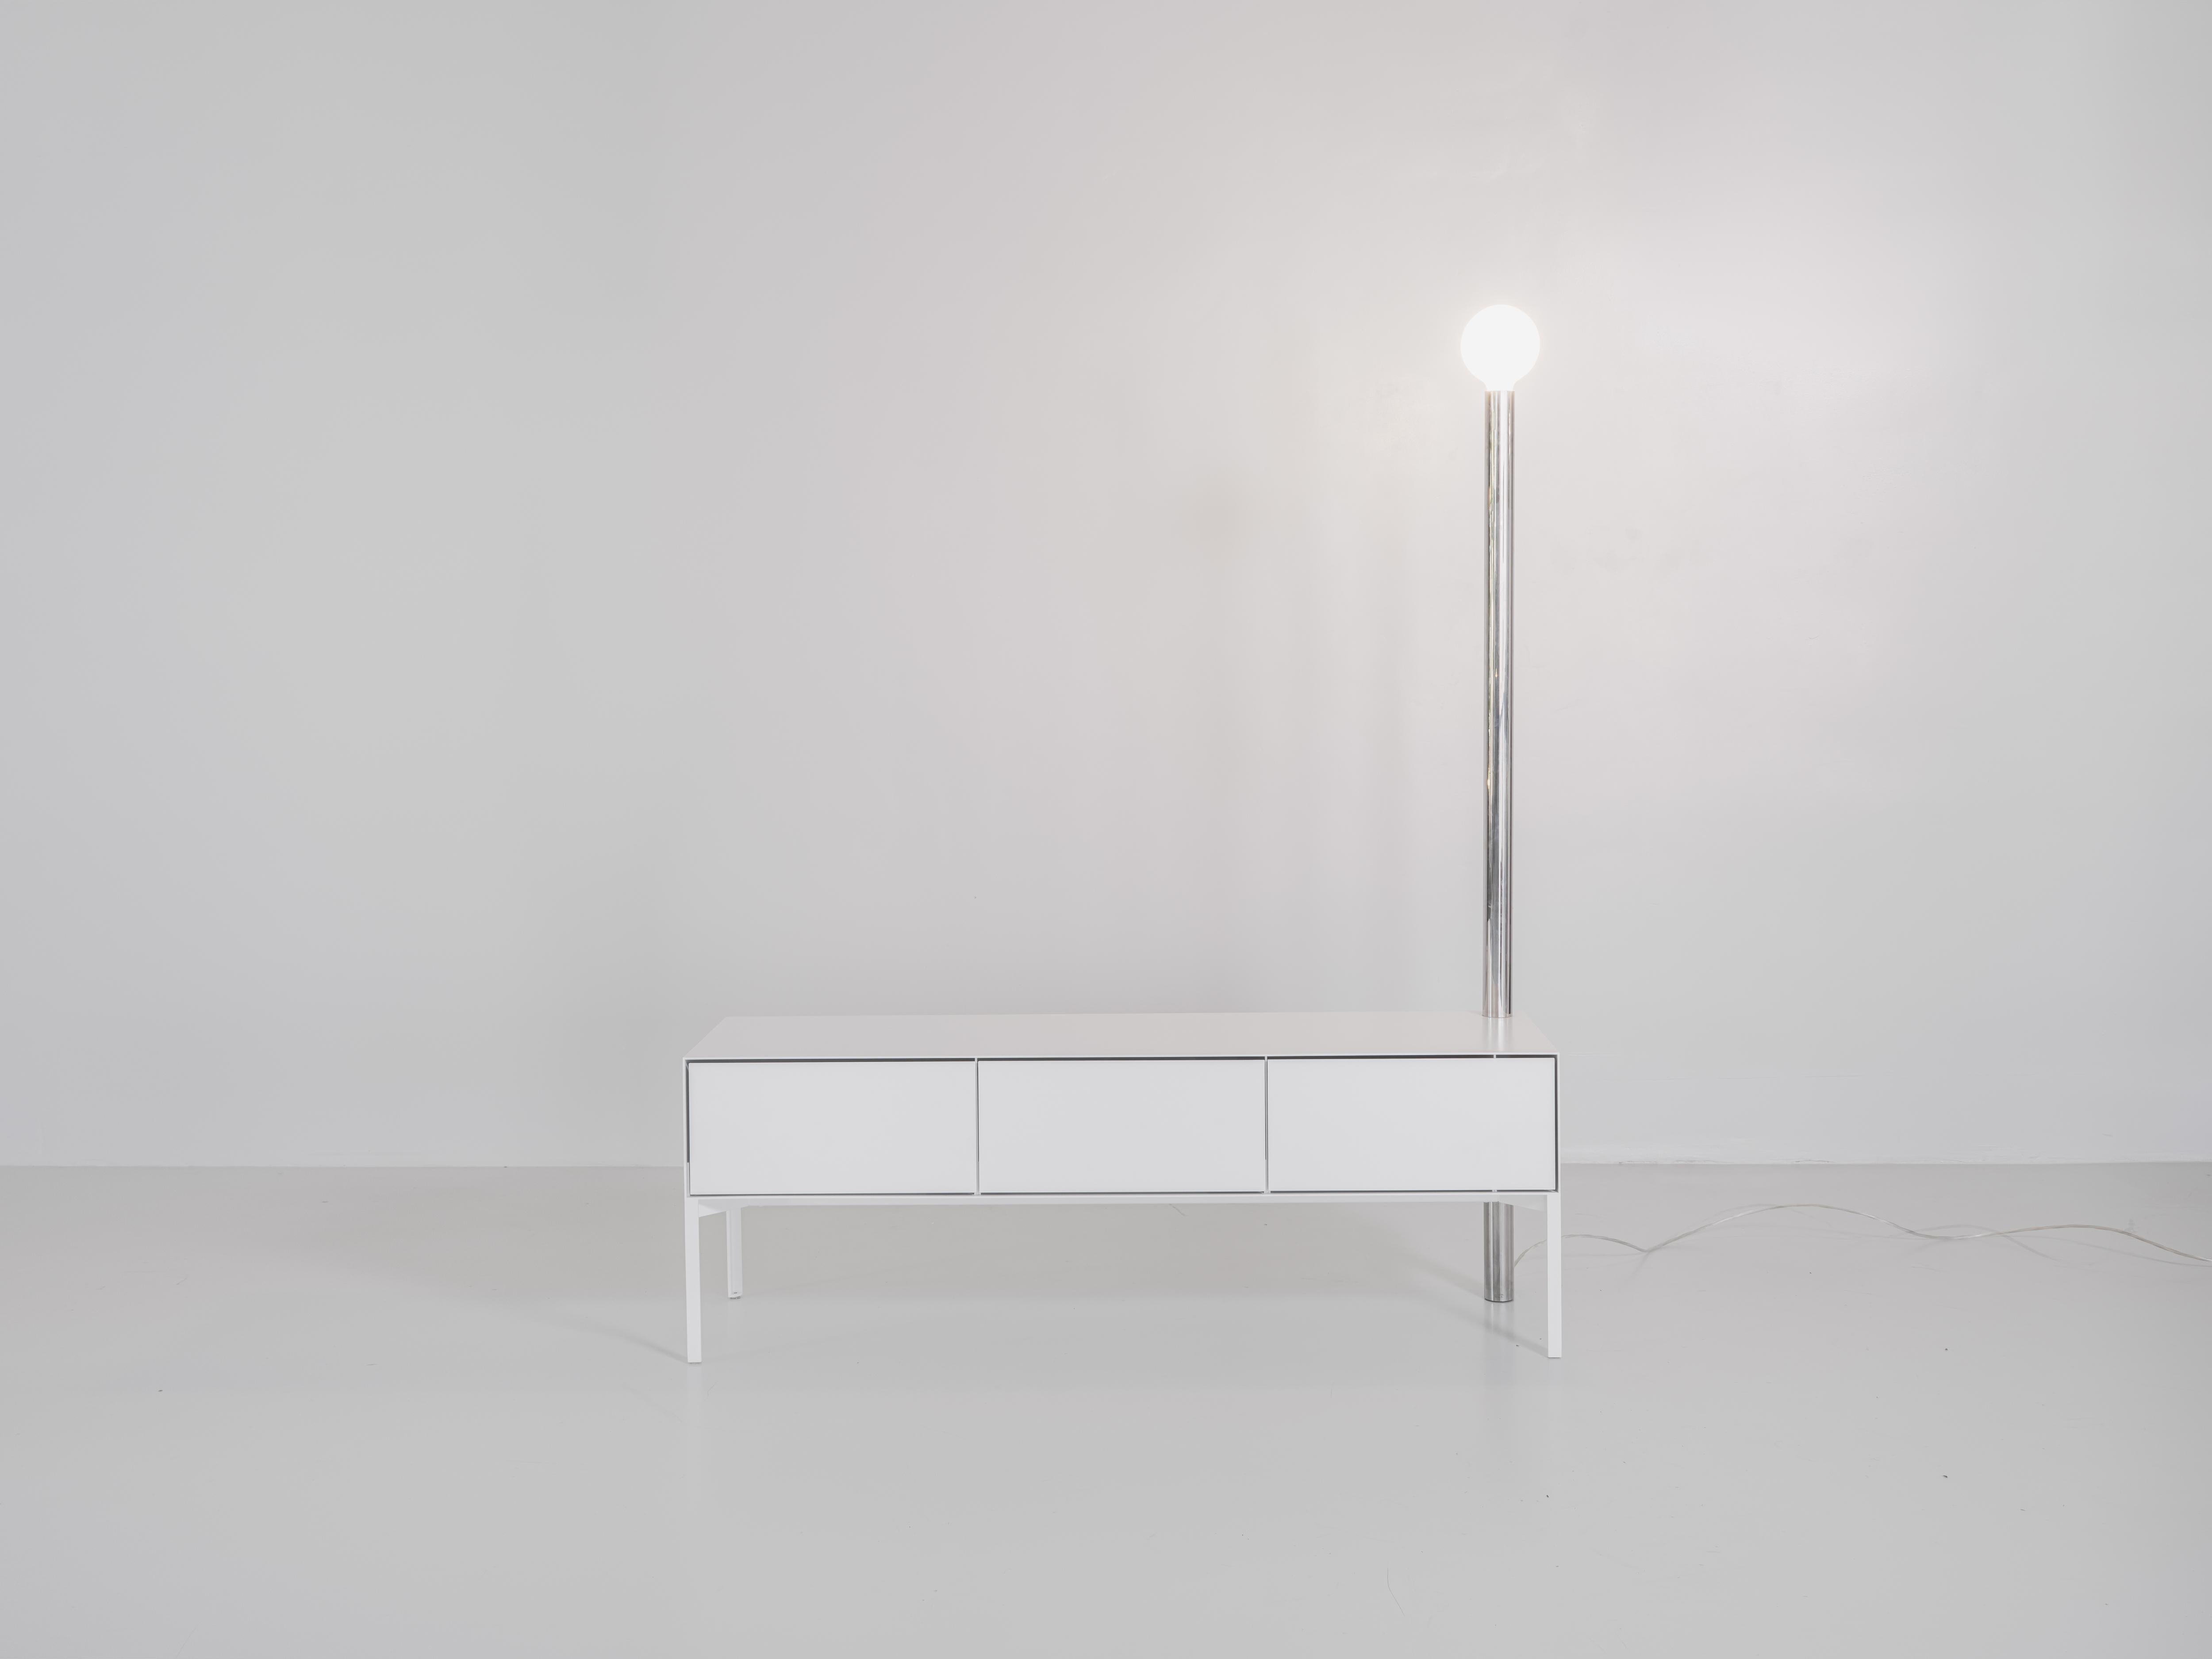 Sam Chermayeff
Sideboard
From the series “Beasts”
Produced in exclusive for SIDE GALLERY
Manufactured by ERTL und ZULL
Berlin, 2021
High polished steel, white powder-coated steel
Contemporary Design

Measurements
130 cm x 30 cm x 145h cm